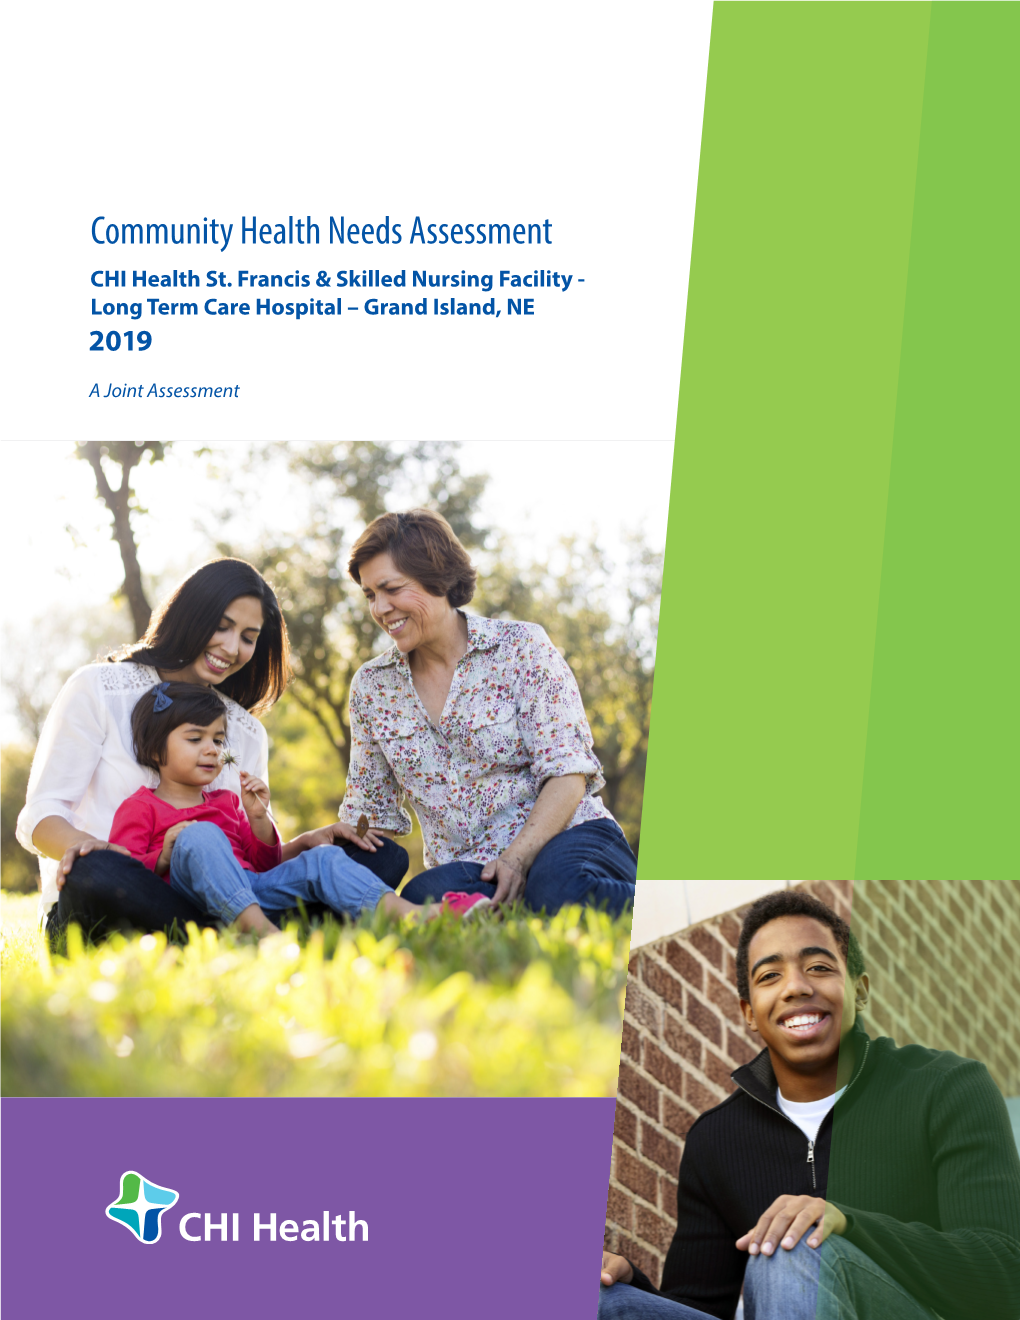 CHI Health St. Francis and SNF 2019 Community Health Needs Assessment